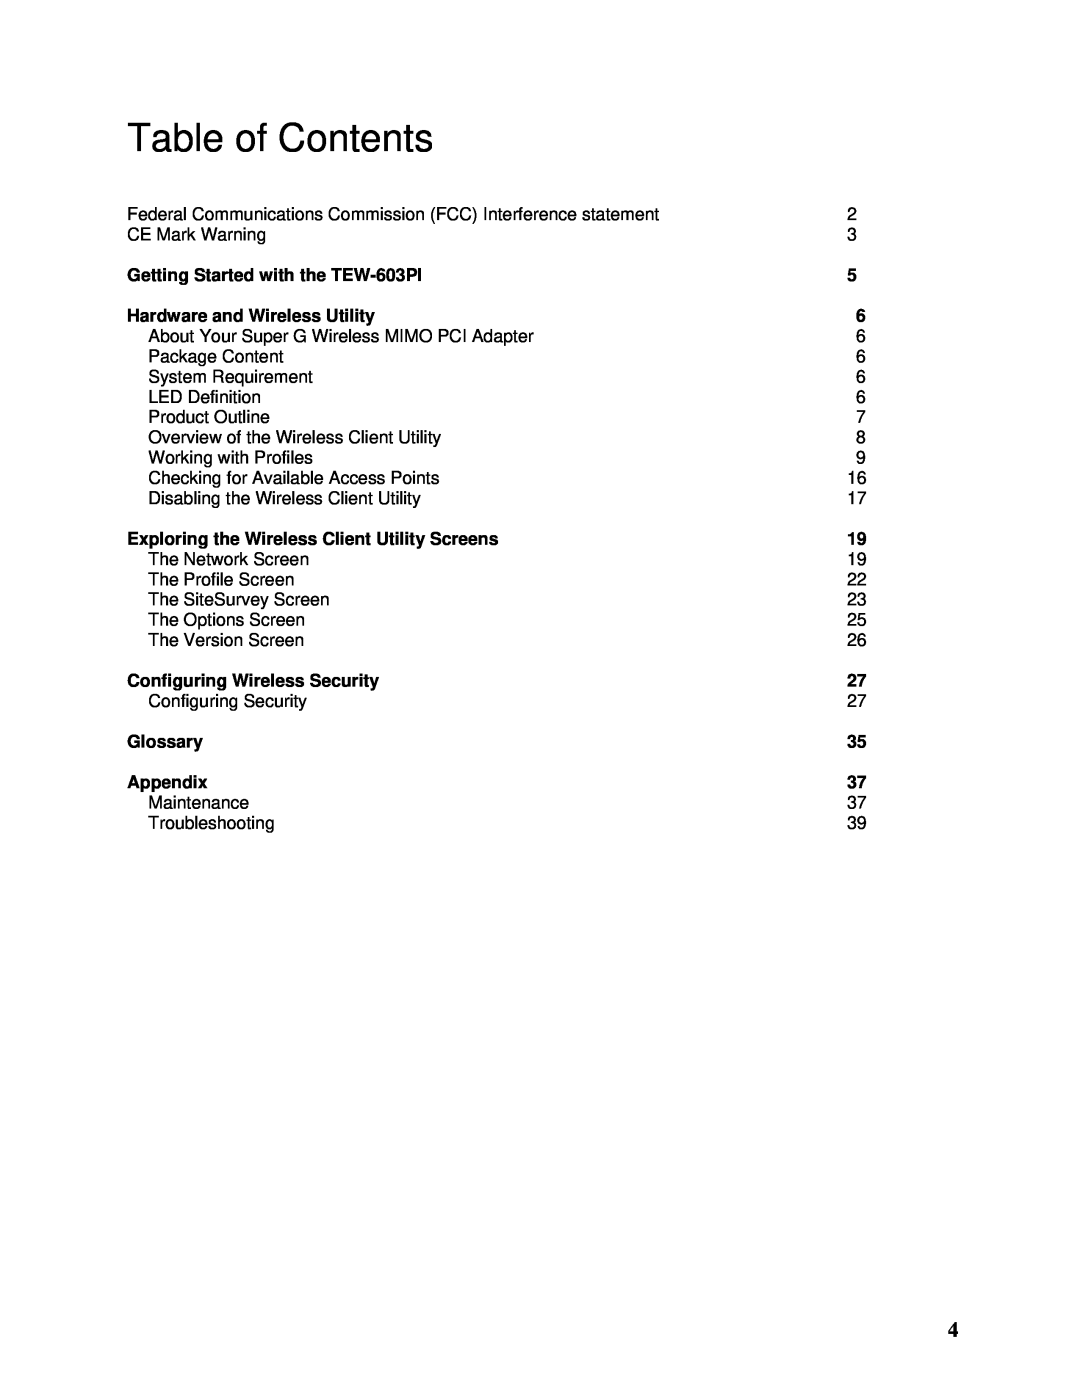 TRENDnet manual Table of Contents, Getting Started with the TEW-603PI, Hardware and Wireless Utility, Glossary, Appendix 